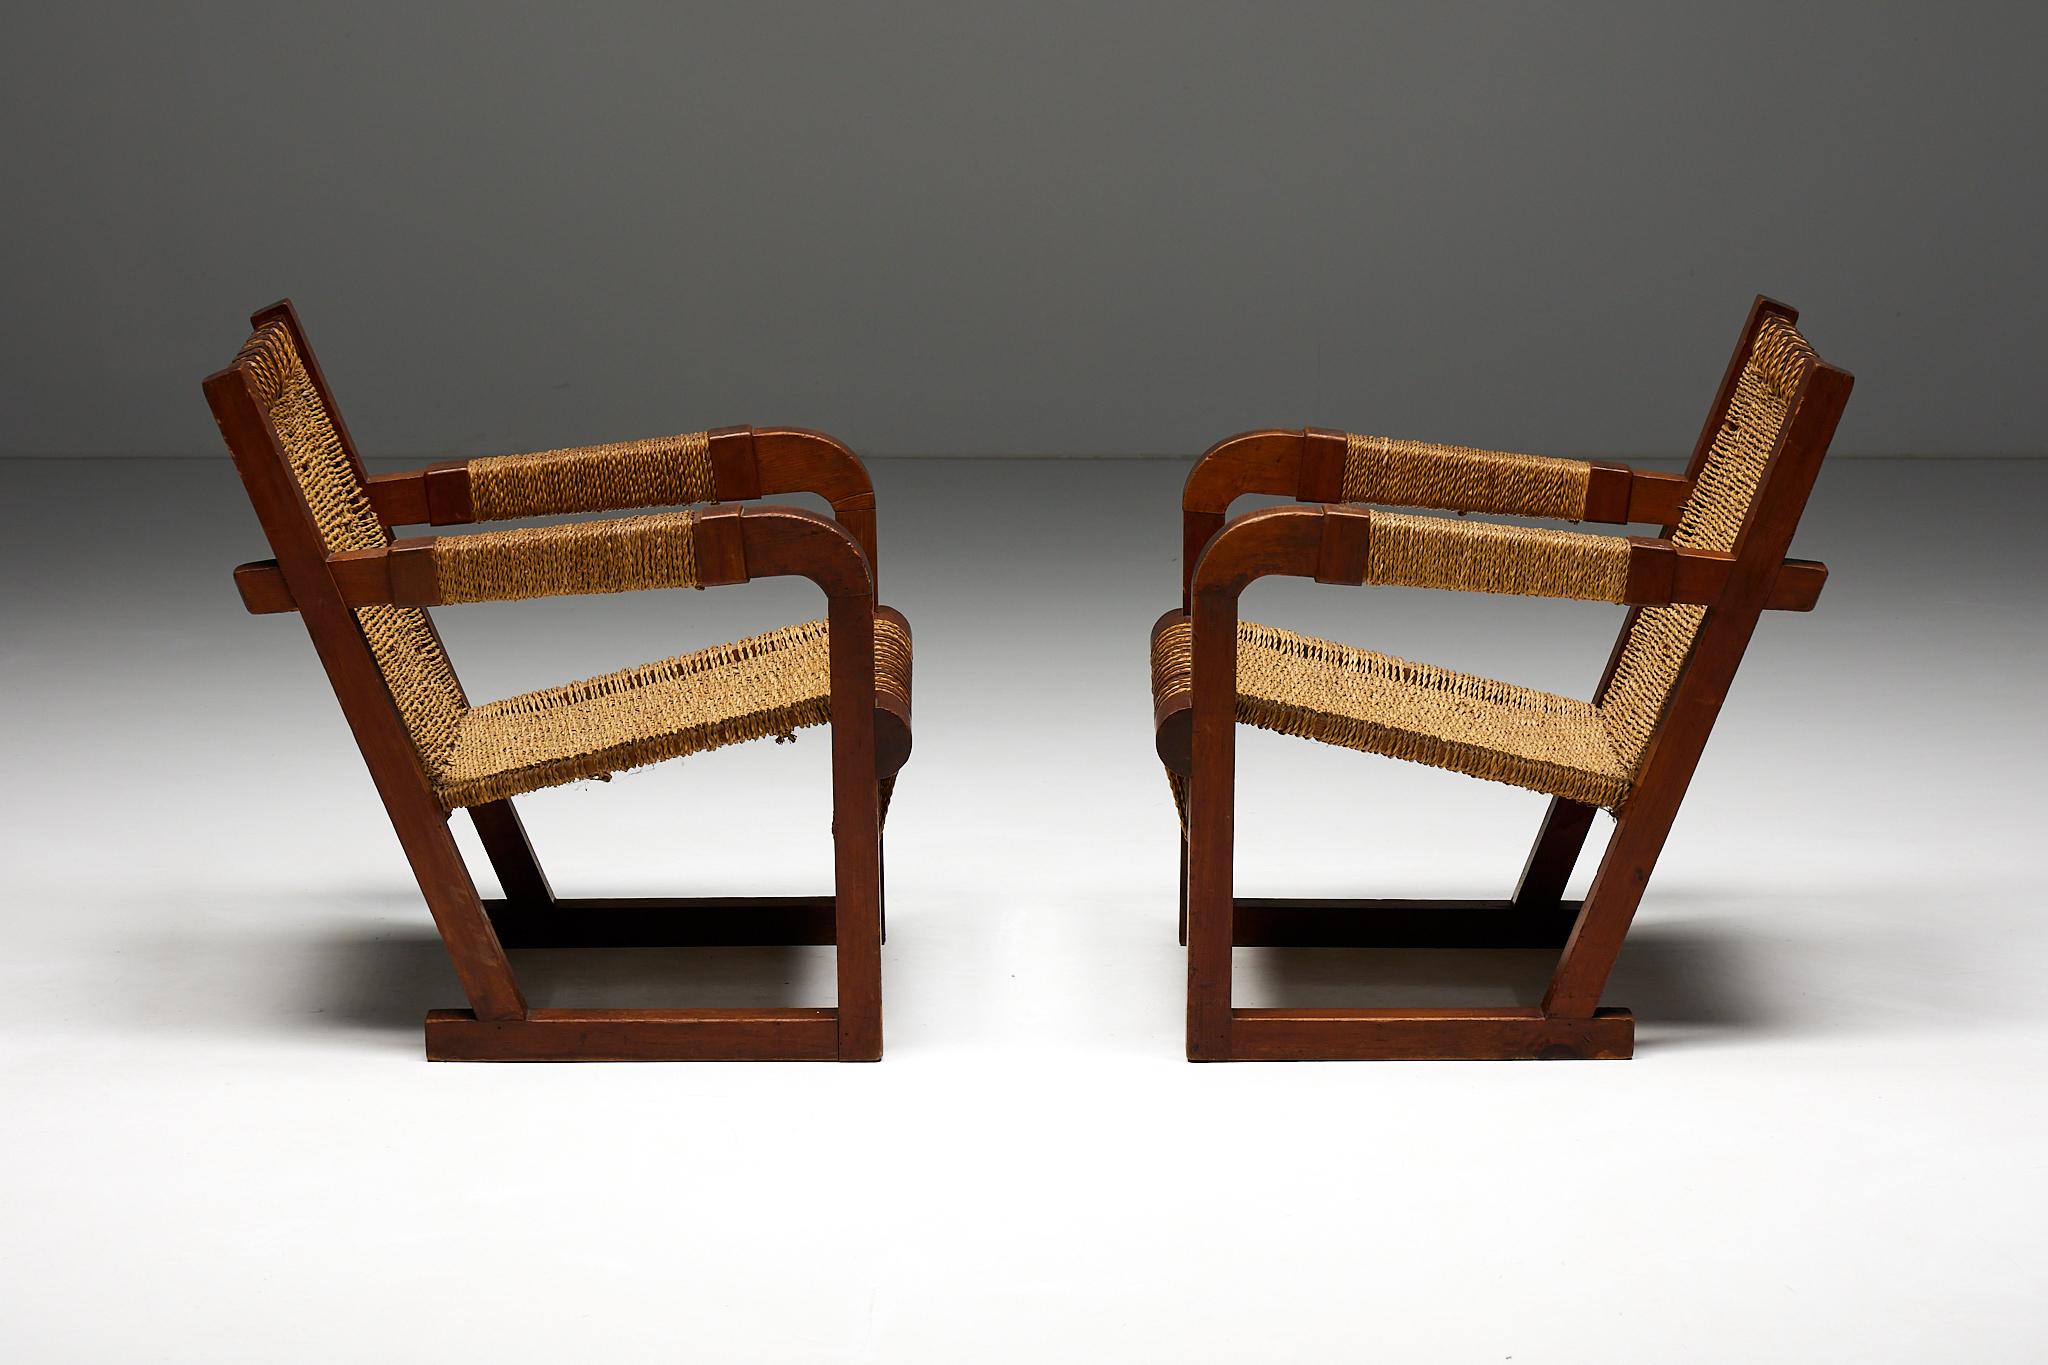 Rustic Easy Chair in Rope and Pitch Pine, France, 1930s